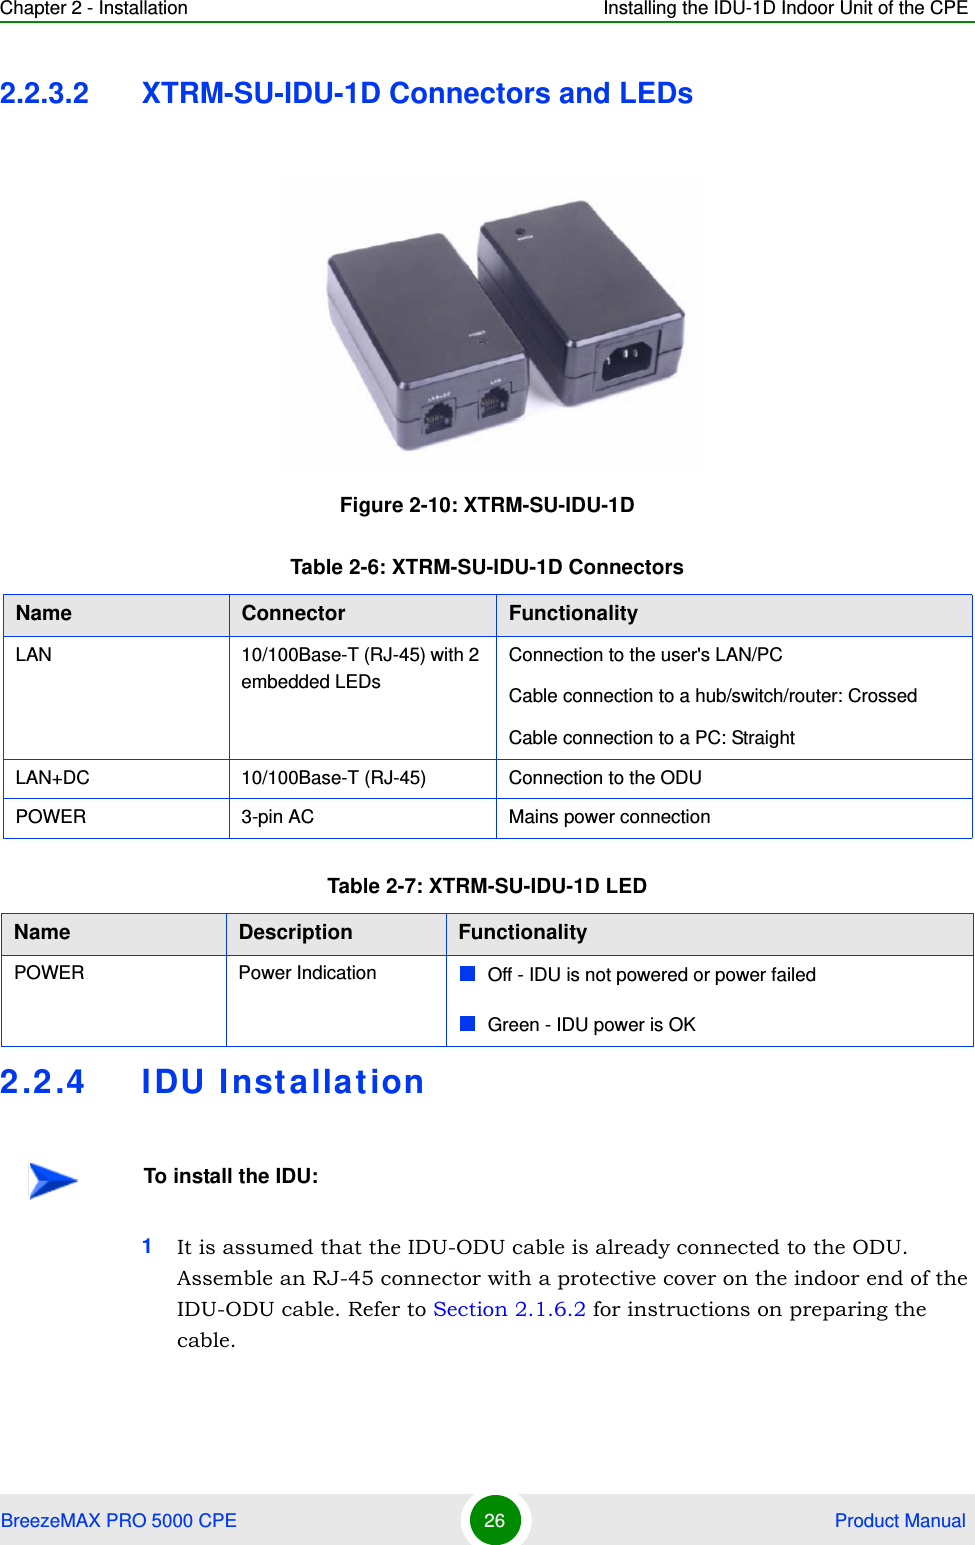 Chapter 2 - Installation Installing the IDU-1D Indoor Unit of the CPEBreezeMAX PRO 5000 CPE 26  Product Manual2.2.3.2 XTRM-SU-IDU-1D Connectors and LEDs2.2.4 IDU I nst allation1It is assumed that the IDU-ODU cable is already connected to the ODU. Assemble an RJ-45 connector with a protective cover on the indoor end of the IDU-ODU cable. Refer to Section 2.1.6.2 for instructions on preparing the cable.Figure 2-10: XTRM-SU-IDU-1DTable 2-6: XTRM-SU-IDU-1D ConnectorsName Connector FunctionalityLAN 10/100Base-T (RJ-45) with 2 embedded LEDsConnection to the user&apos;s LAN/PCCable connection to a hub/switch/router: CrossedCable connection to a PC: StraightLAN+DC 10/100Base-T (RJ-45) Connection to the ODUPOWER 3-pin AC  Mains power connectionTable 2-7: XTRM-SU-IDU-1D LEDName  Description FunctionalityPOWER Power Indication Off - IDU is not powered or power failedGreen - IDU power is OKTo install the IDU: